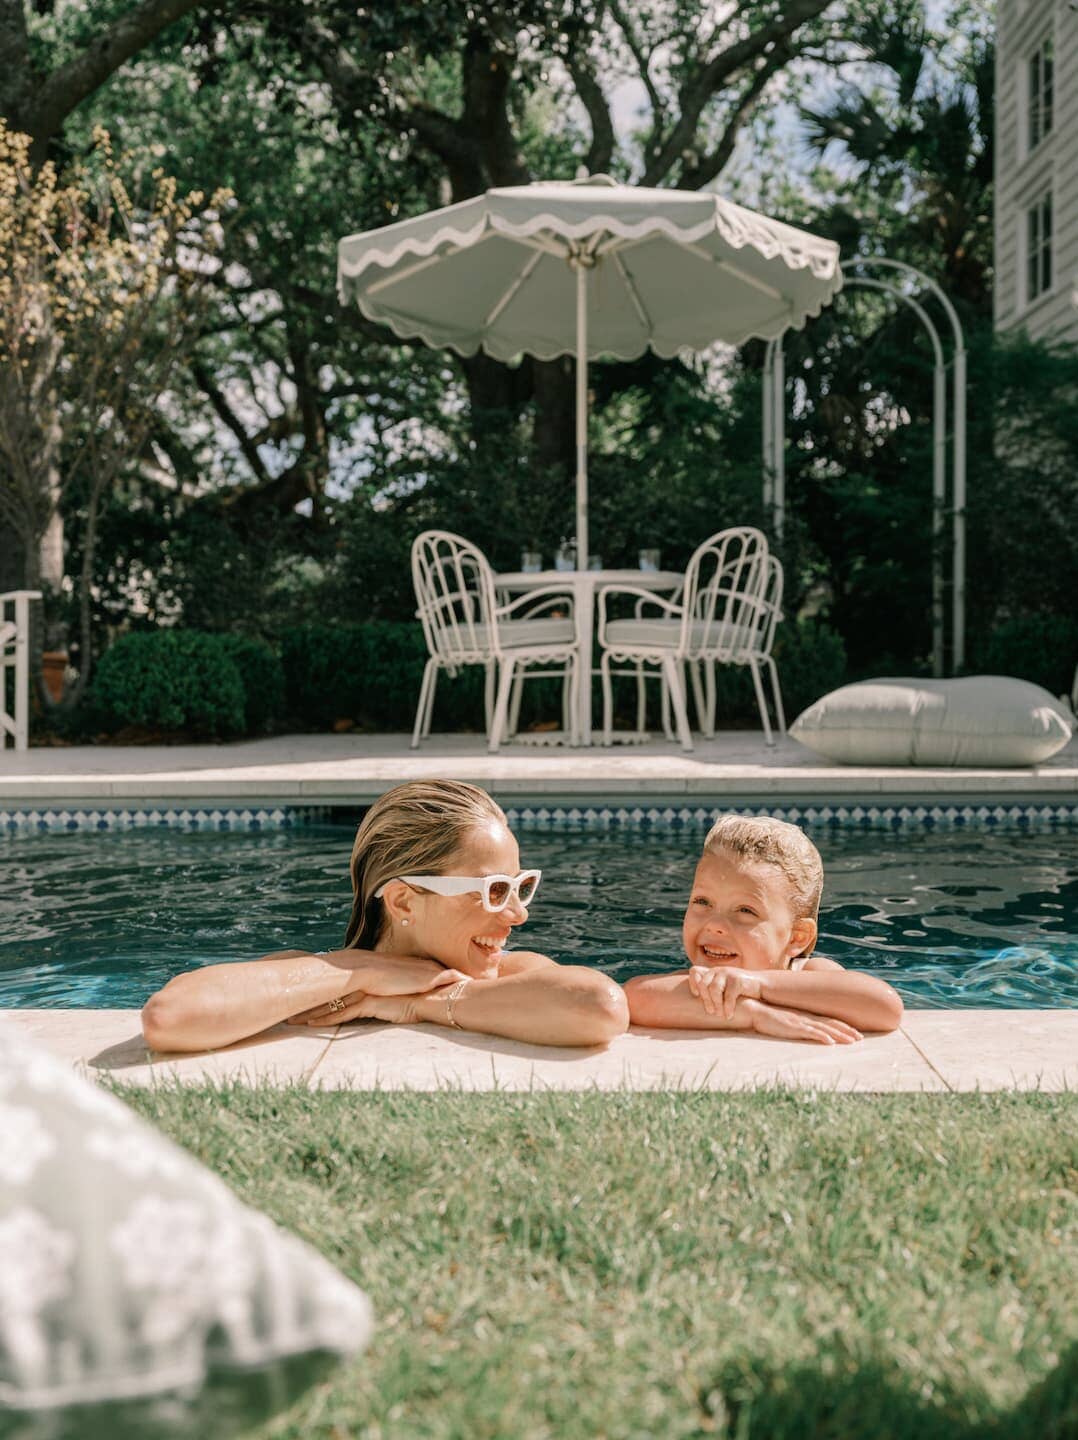 Mother and daughter in pool with outdoor furniture on the patio